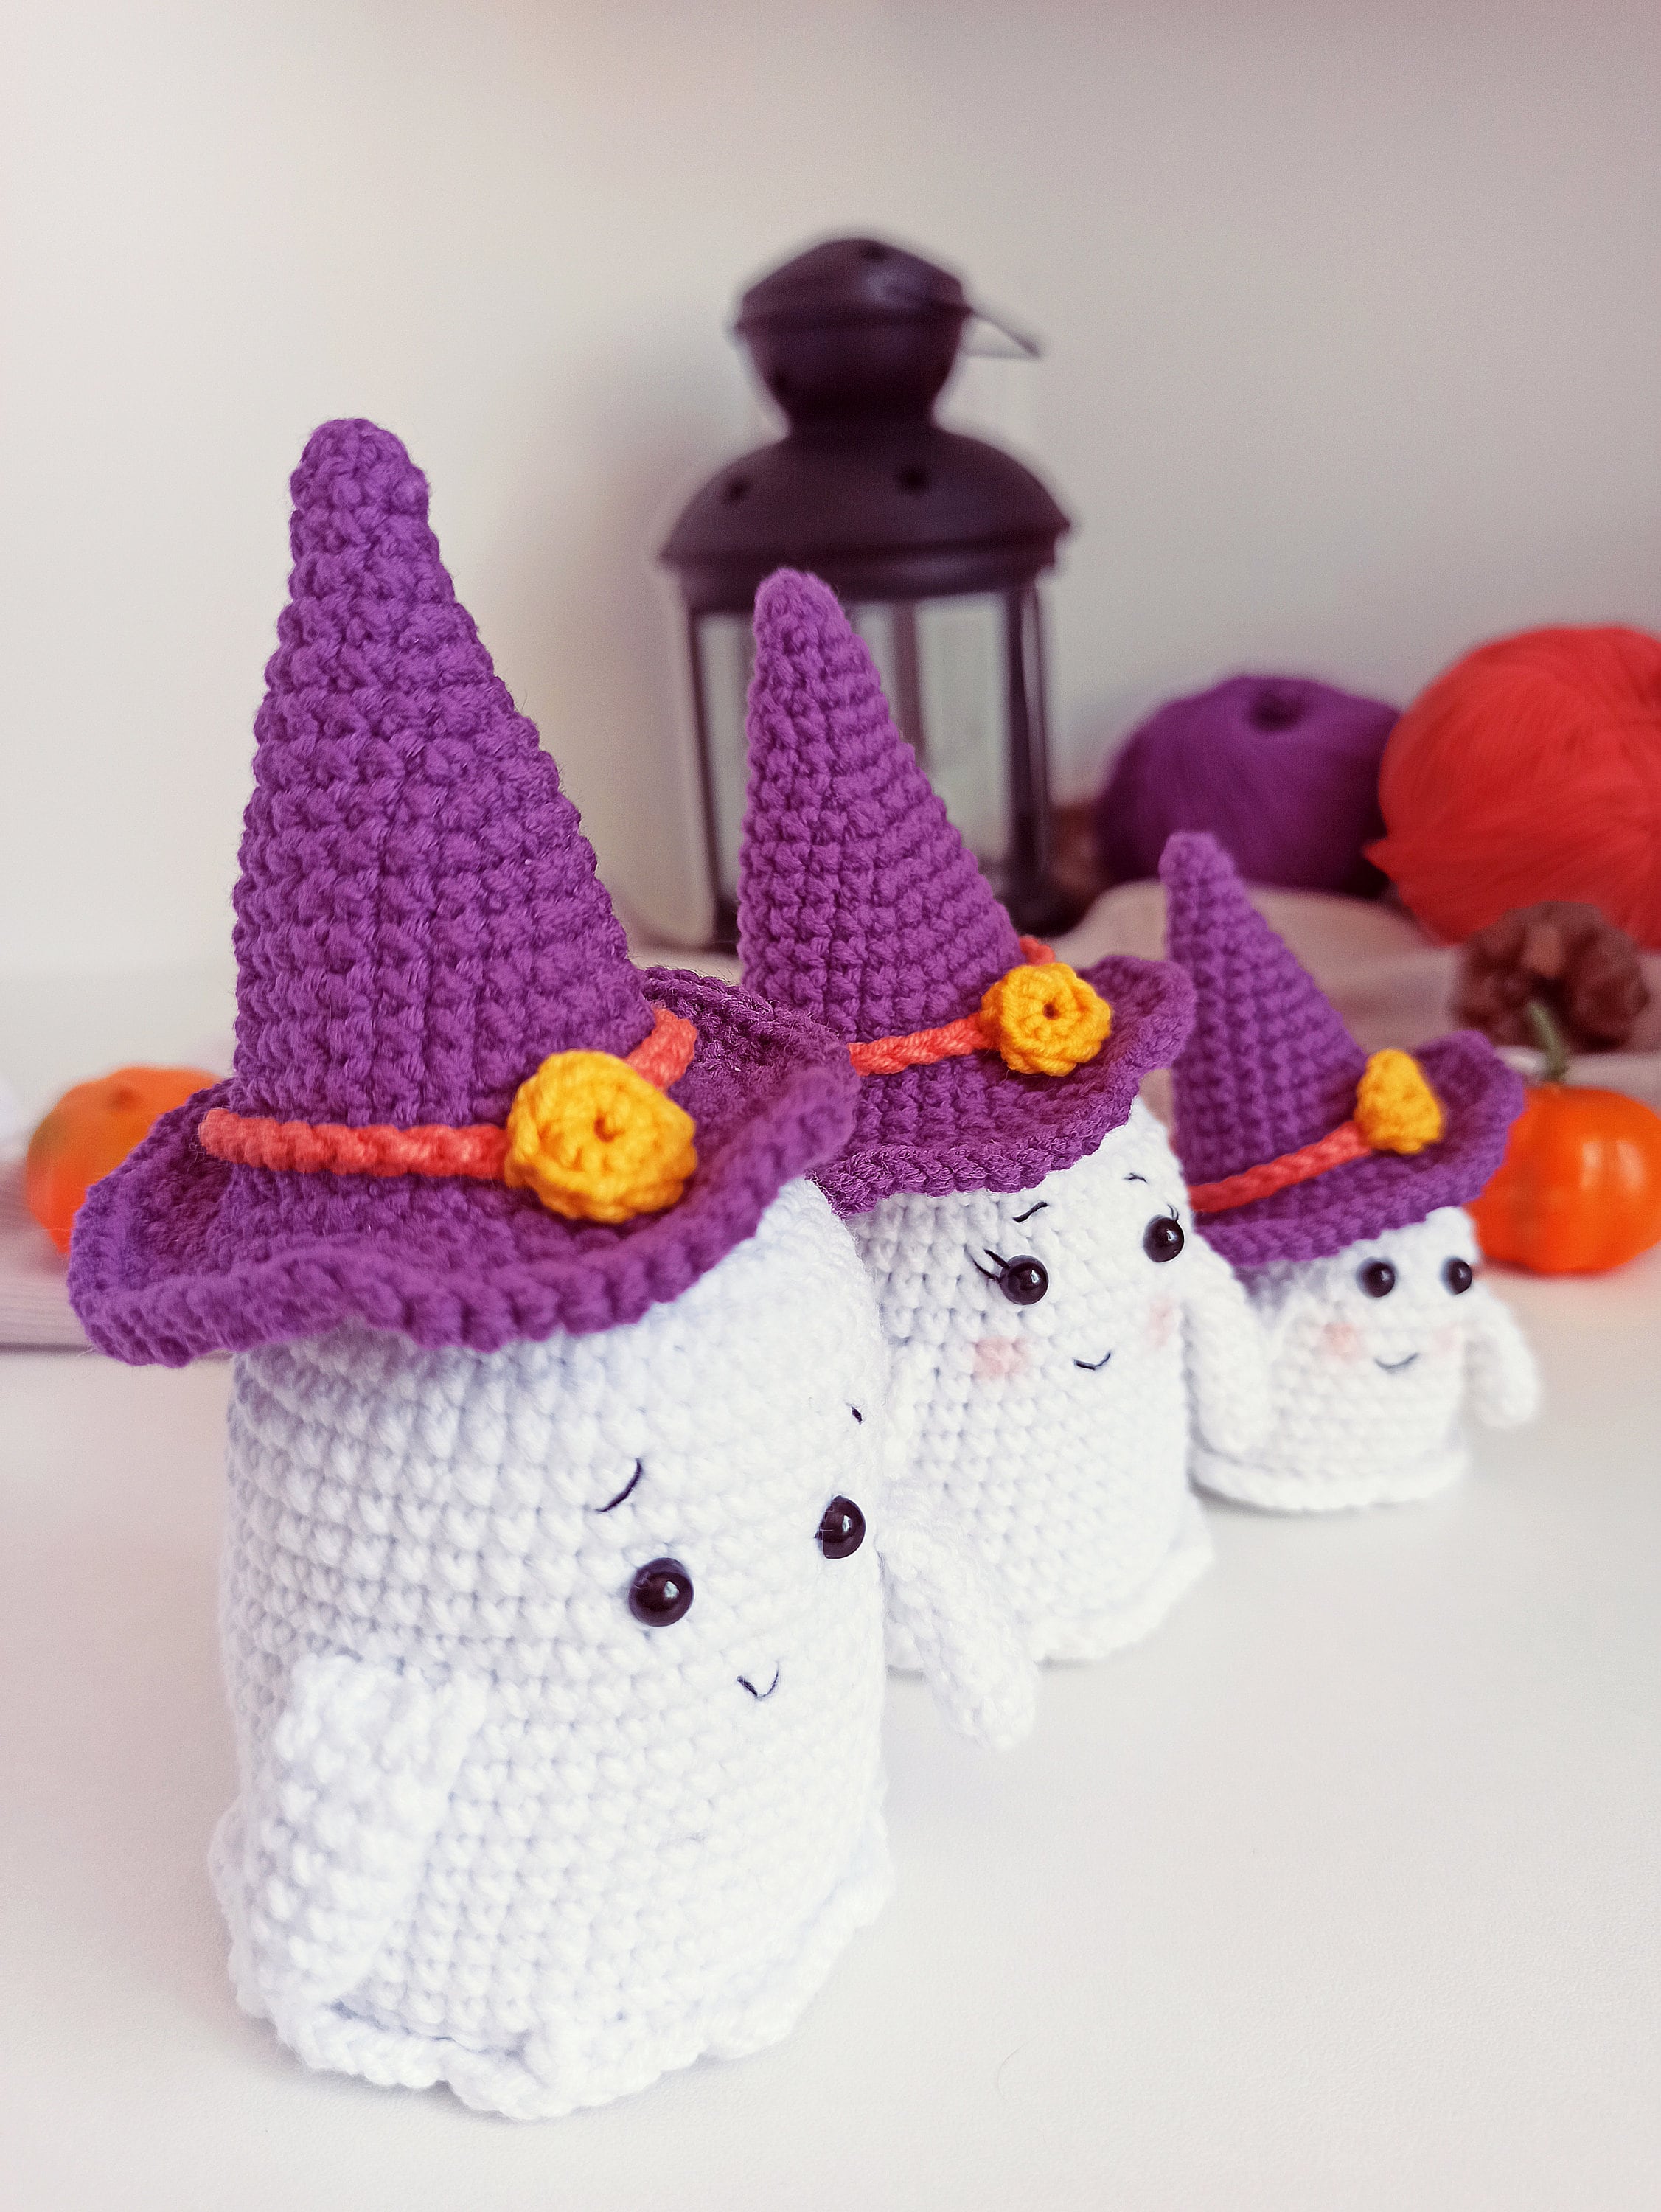 Wrap Your Baby in a Halloween Crochet Newborn Outfit